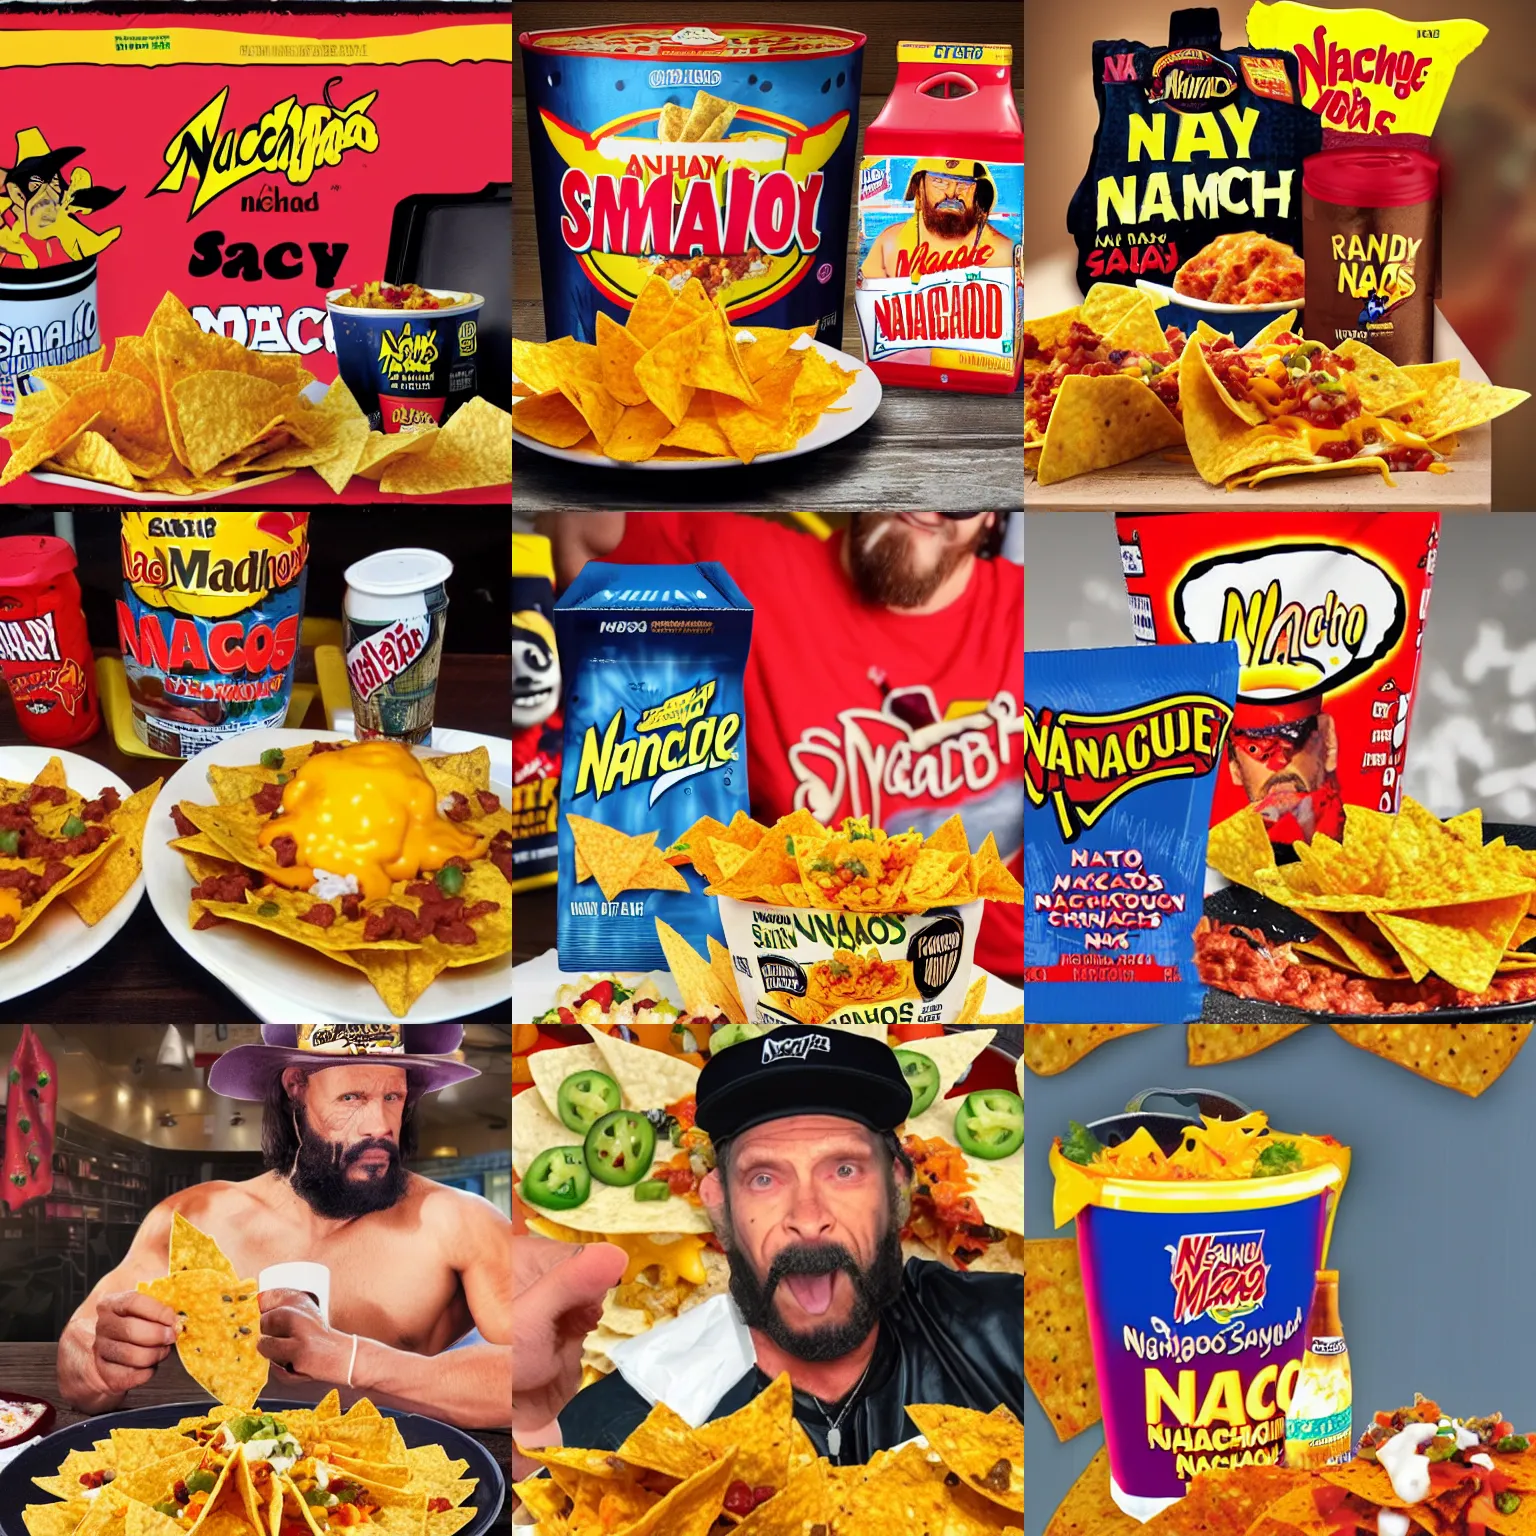 Prompt: Nacho Man Randy Savage, Nachos, product placement, delicious